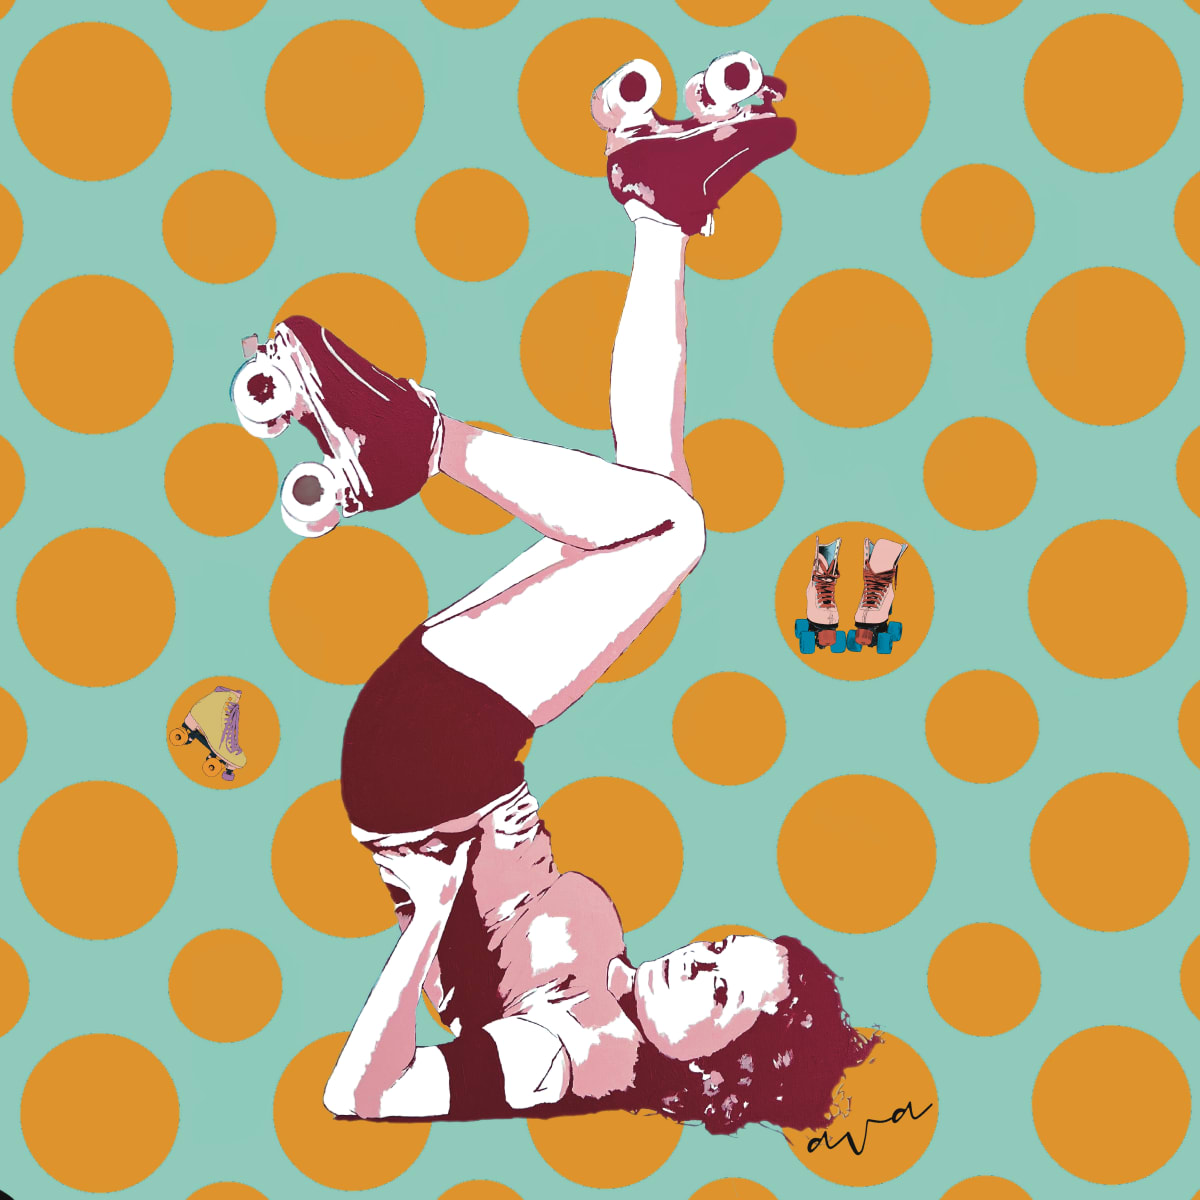 Roller Girl with Polka Dots - Limited Edition Print (150) by Alissa Van Atta 